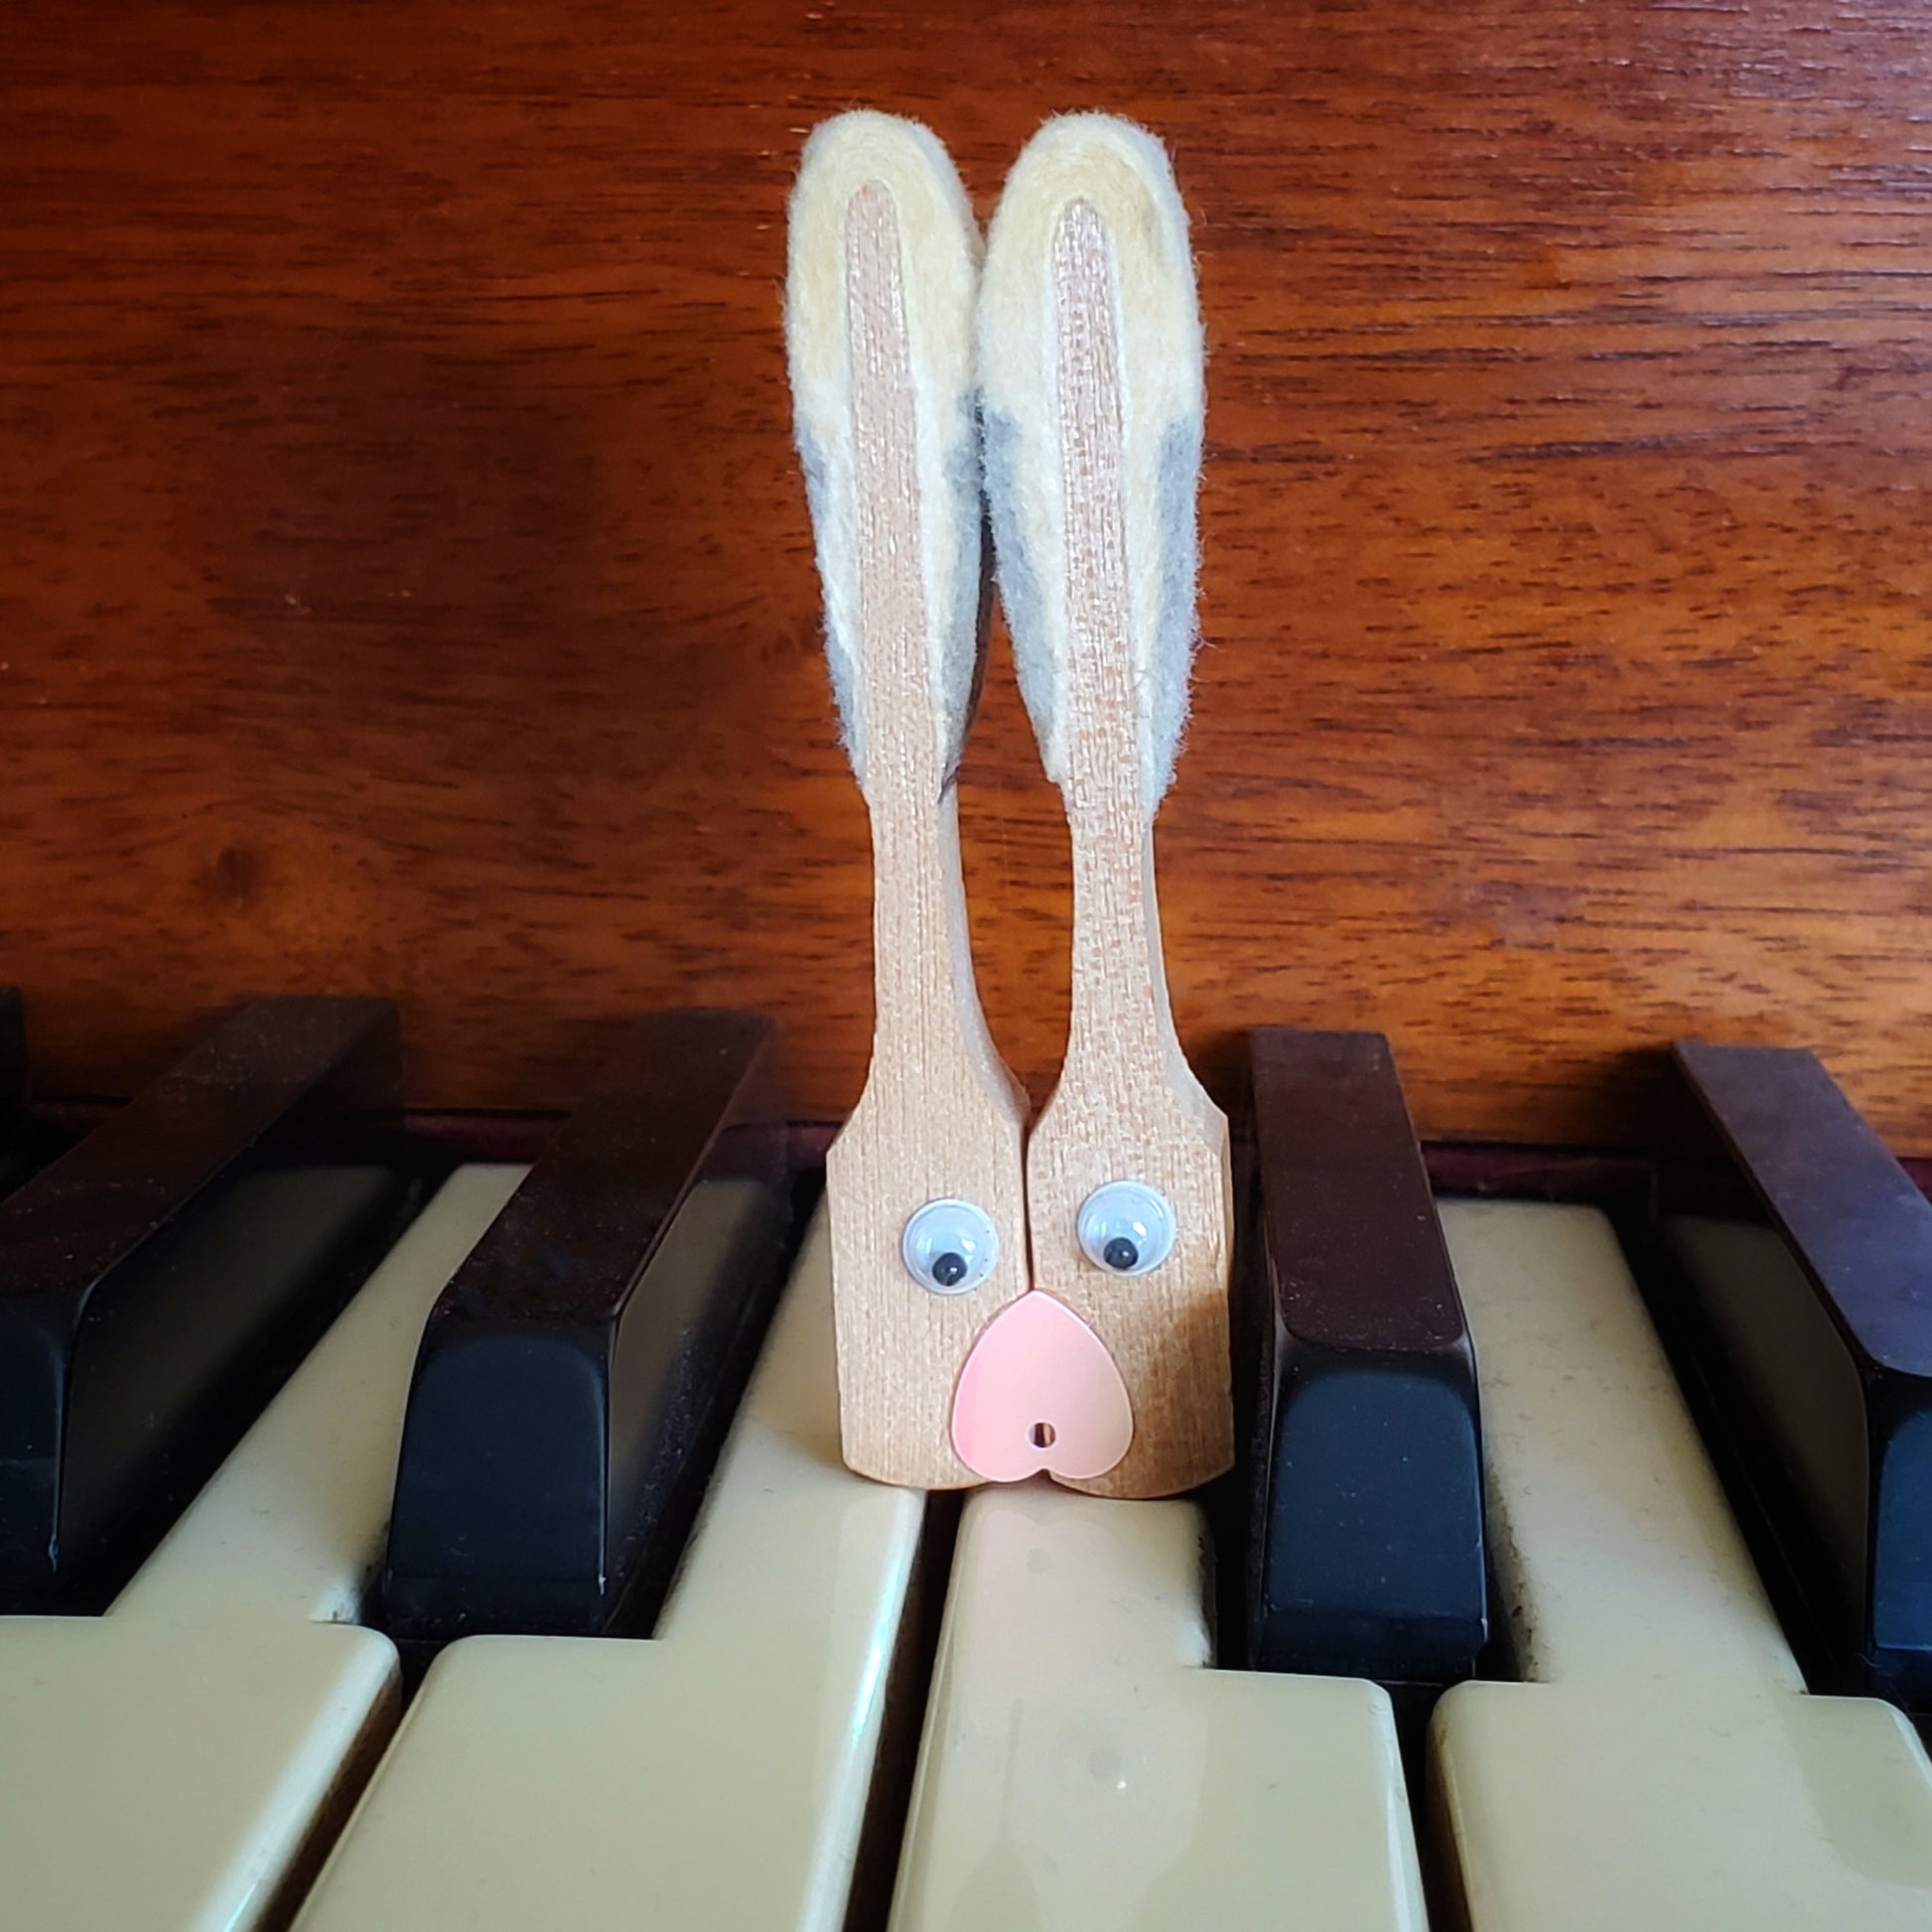 magnet in the shape of a bunny's head - made from 2 upcycled piano hammers - magnet is sitting on a piano keyboad